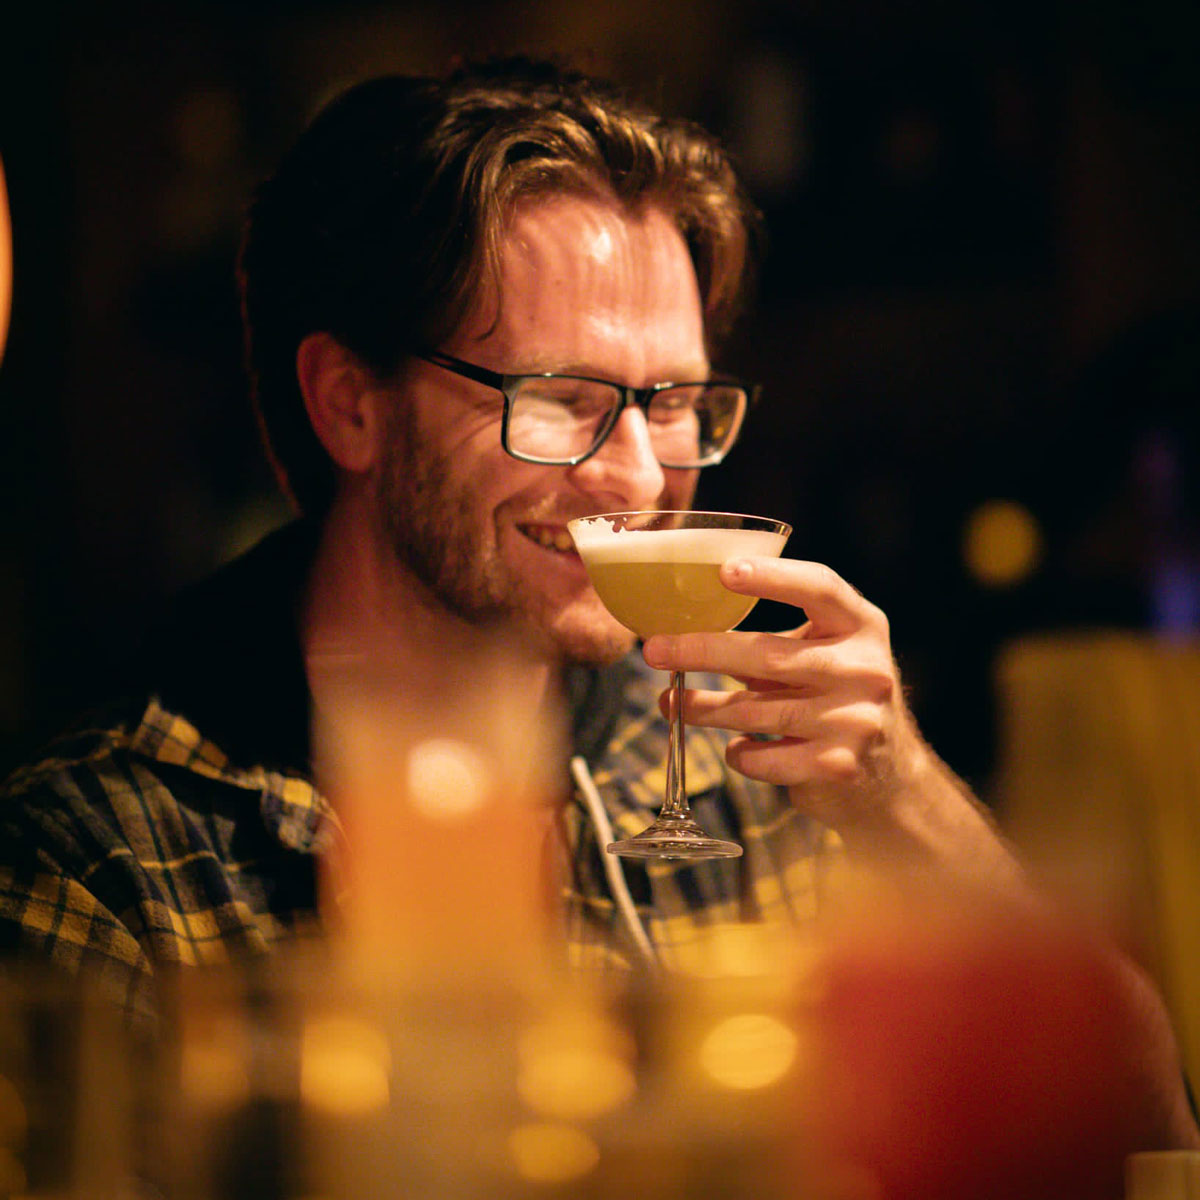 A smiling bespectacled young man drinks a cocktail